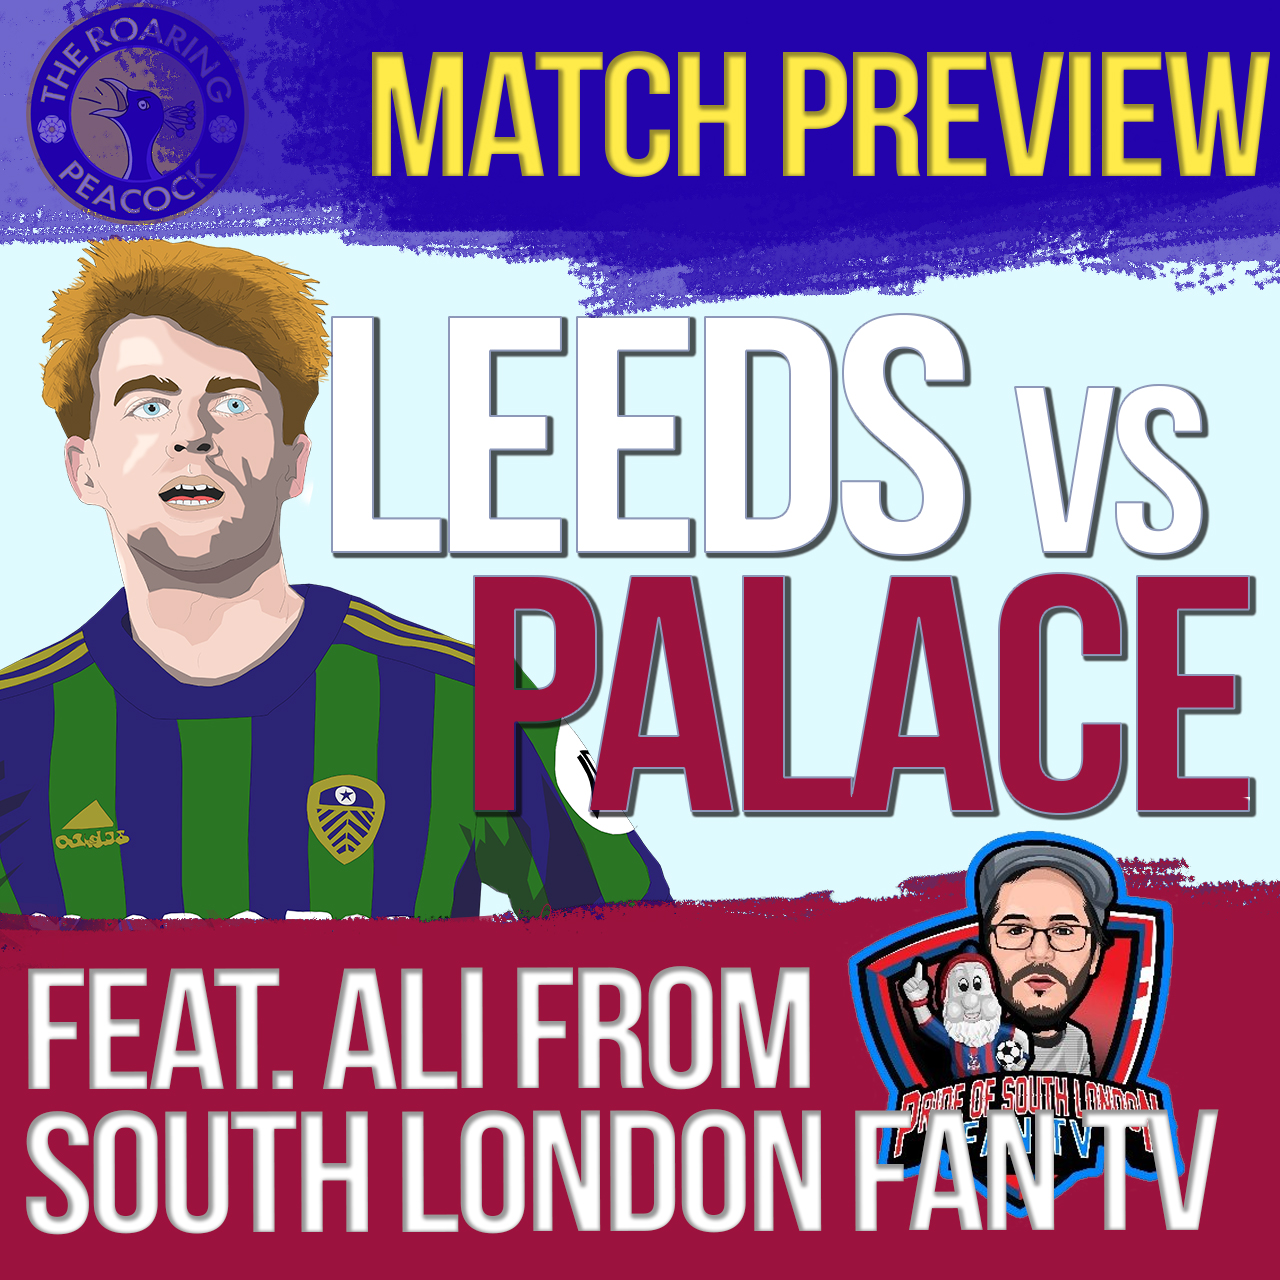 Leeds vs Crystal Palace | Match Preview feat. Ali from South London Fan TV